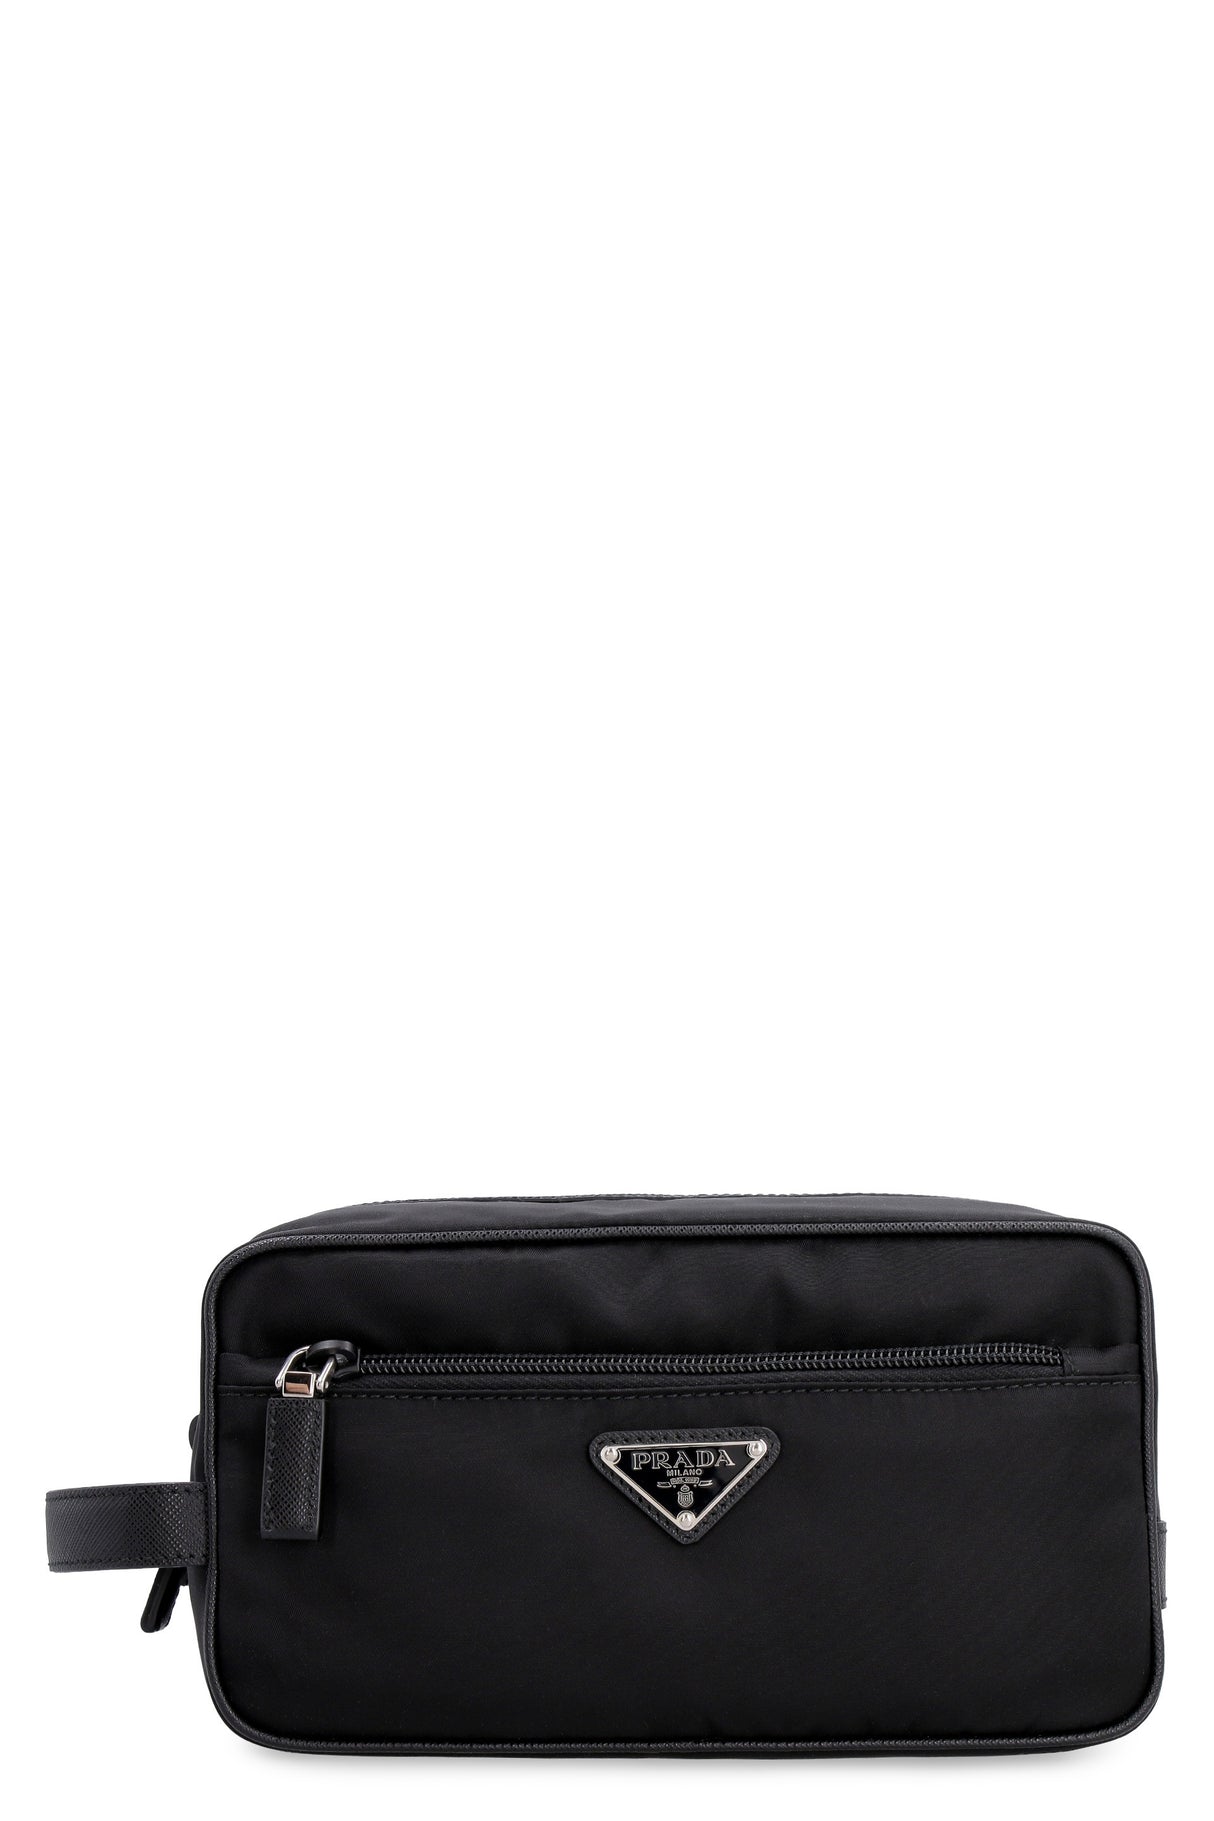 PRADA Sustainable Black Beauty Case for Men - Carry All Your Essentials in Style